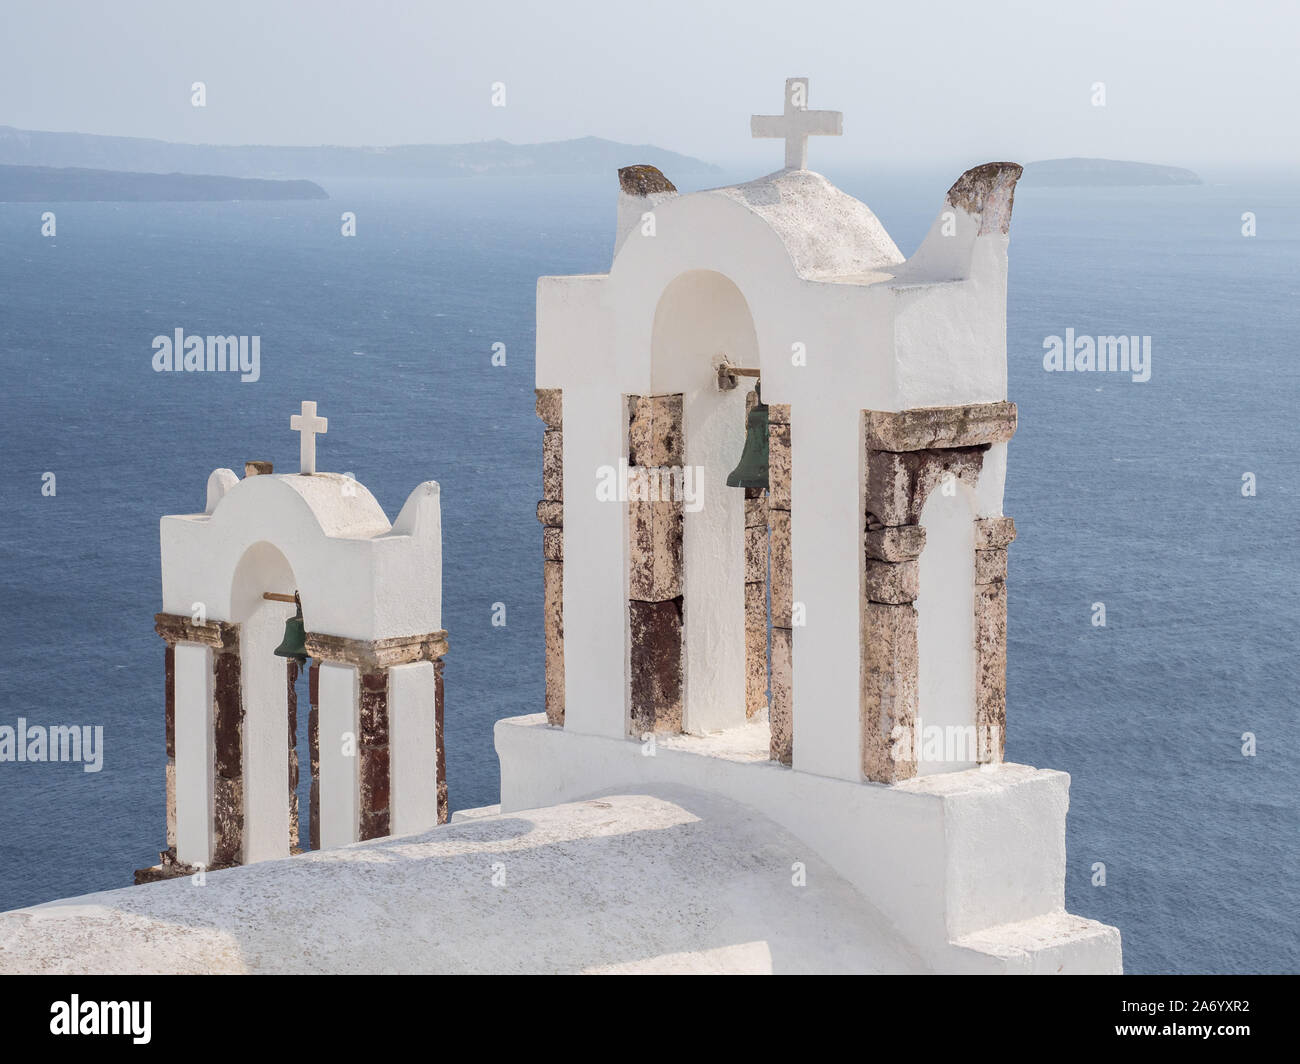 a pair of two white wash bell tower towers with cross crosses crucifix Mediterranean sea water and horizon mountains background Oia Santorini Stock Photo